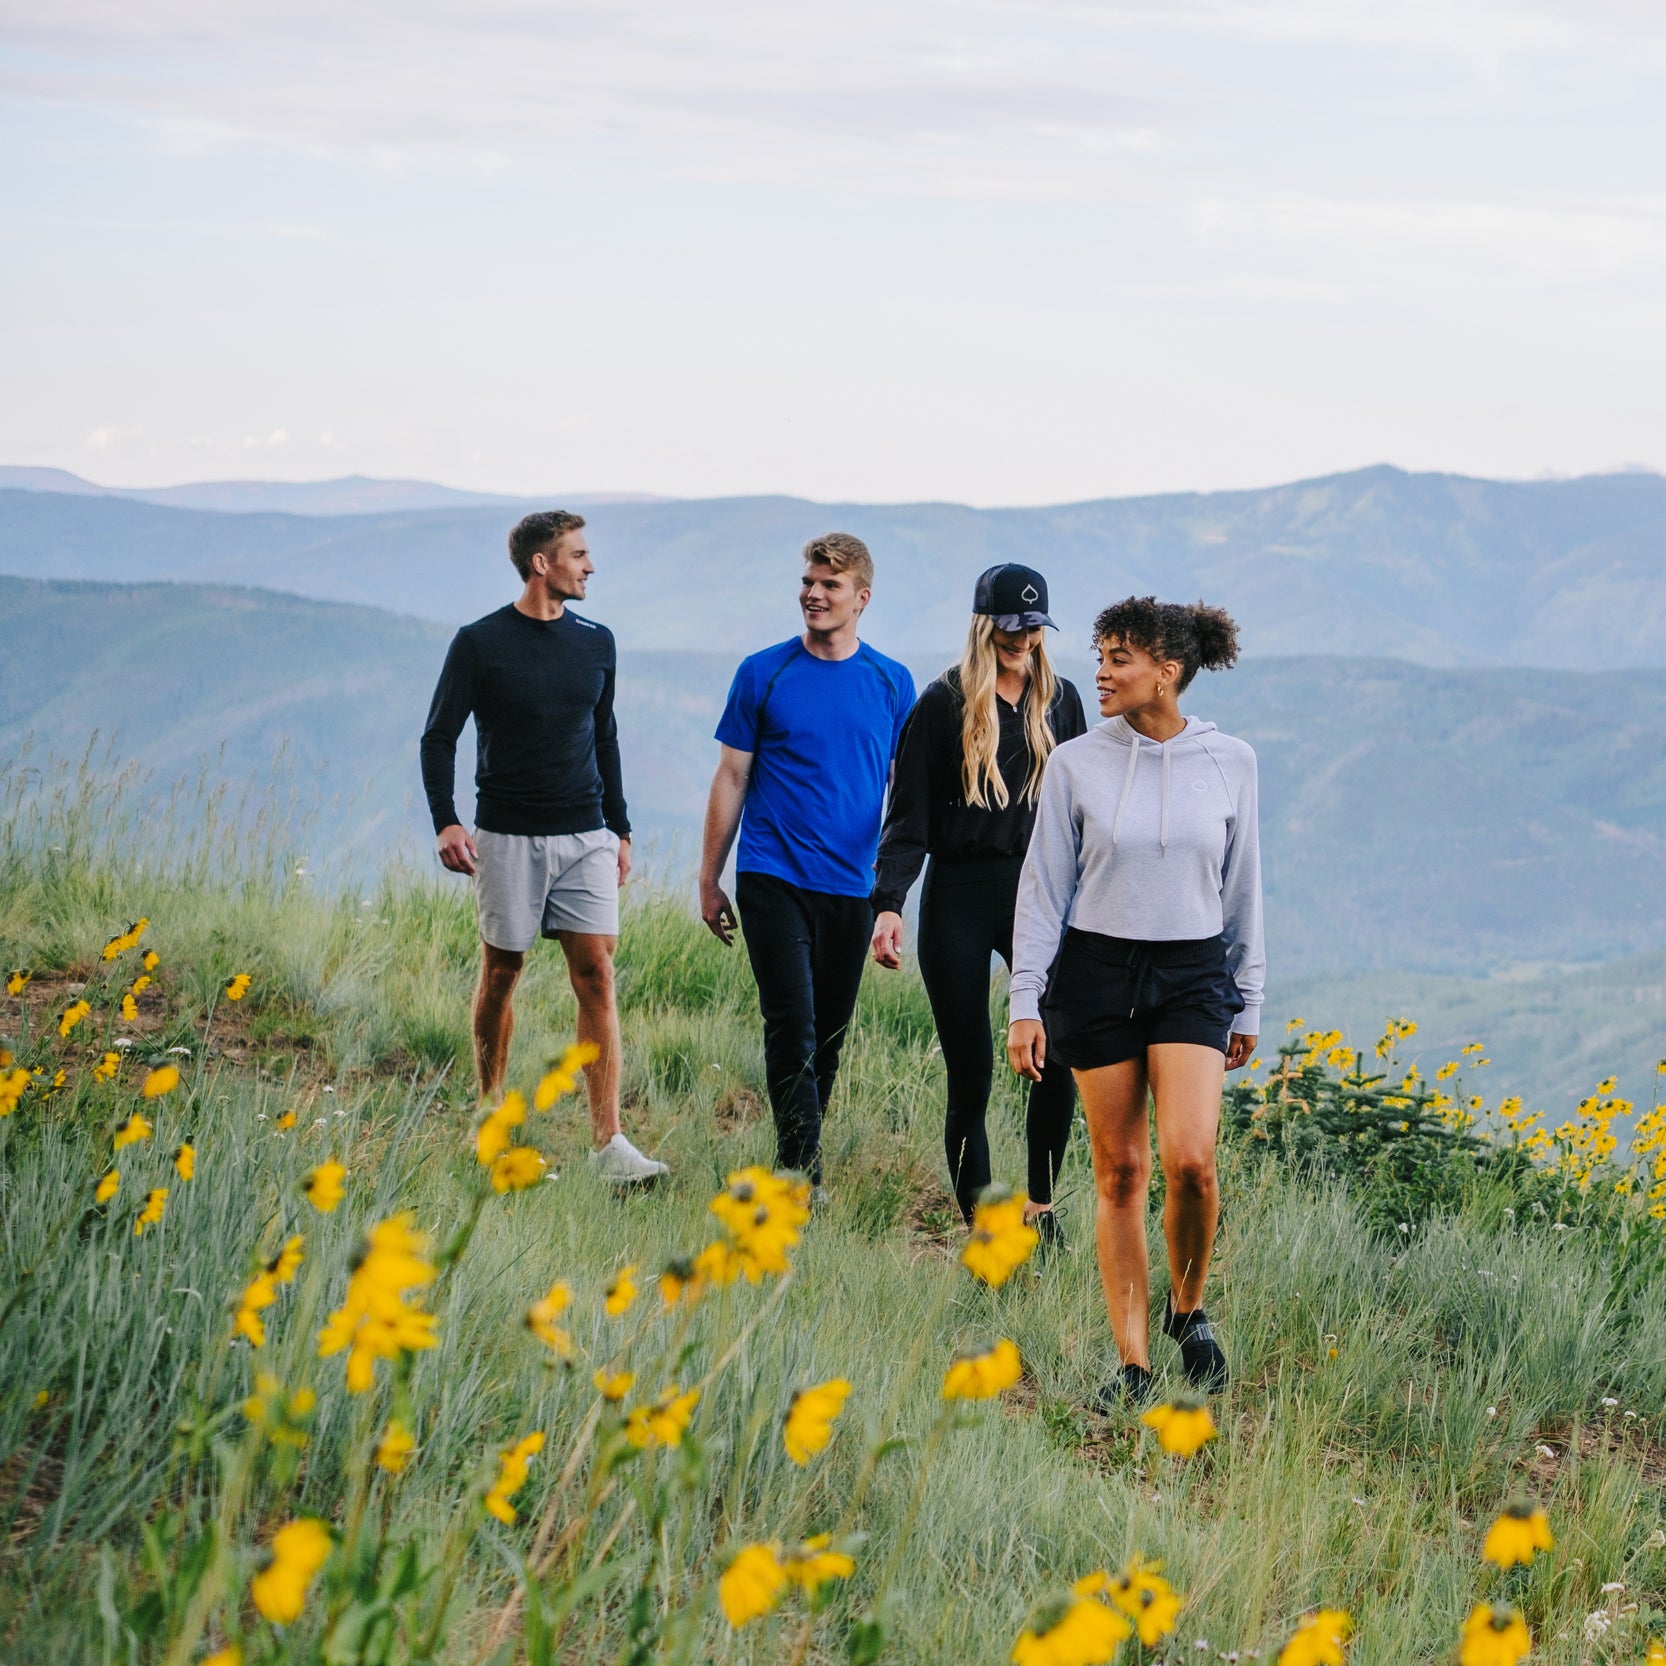 The Trek at Buckhorn, a hiking and dining experience in Aspen